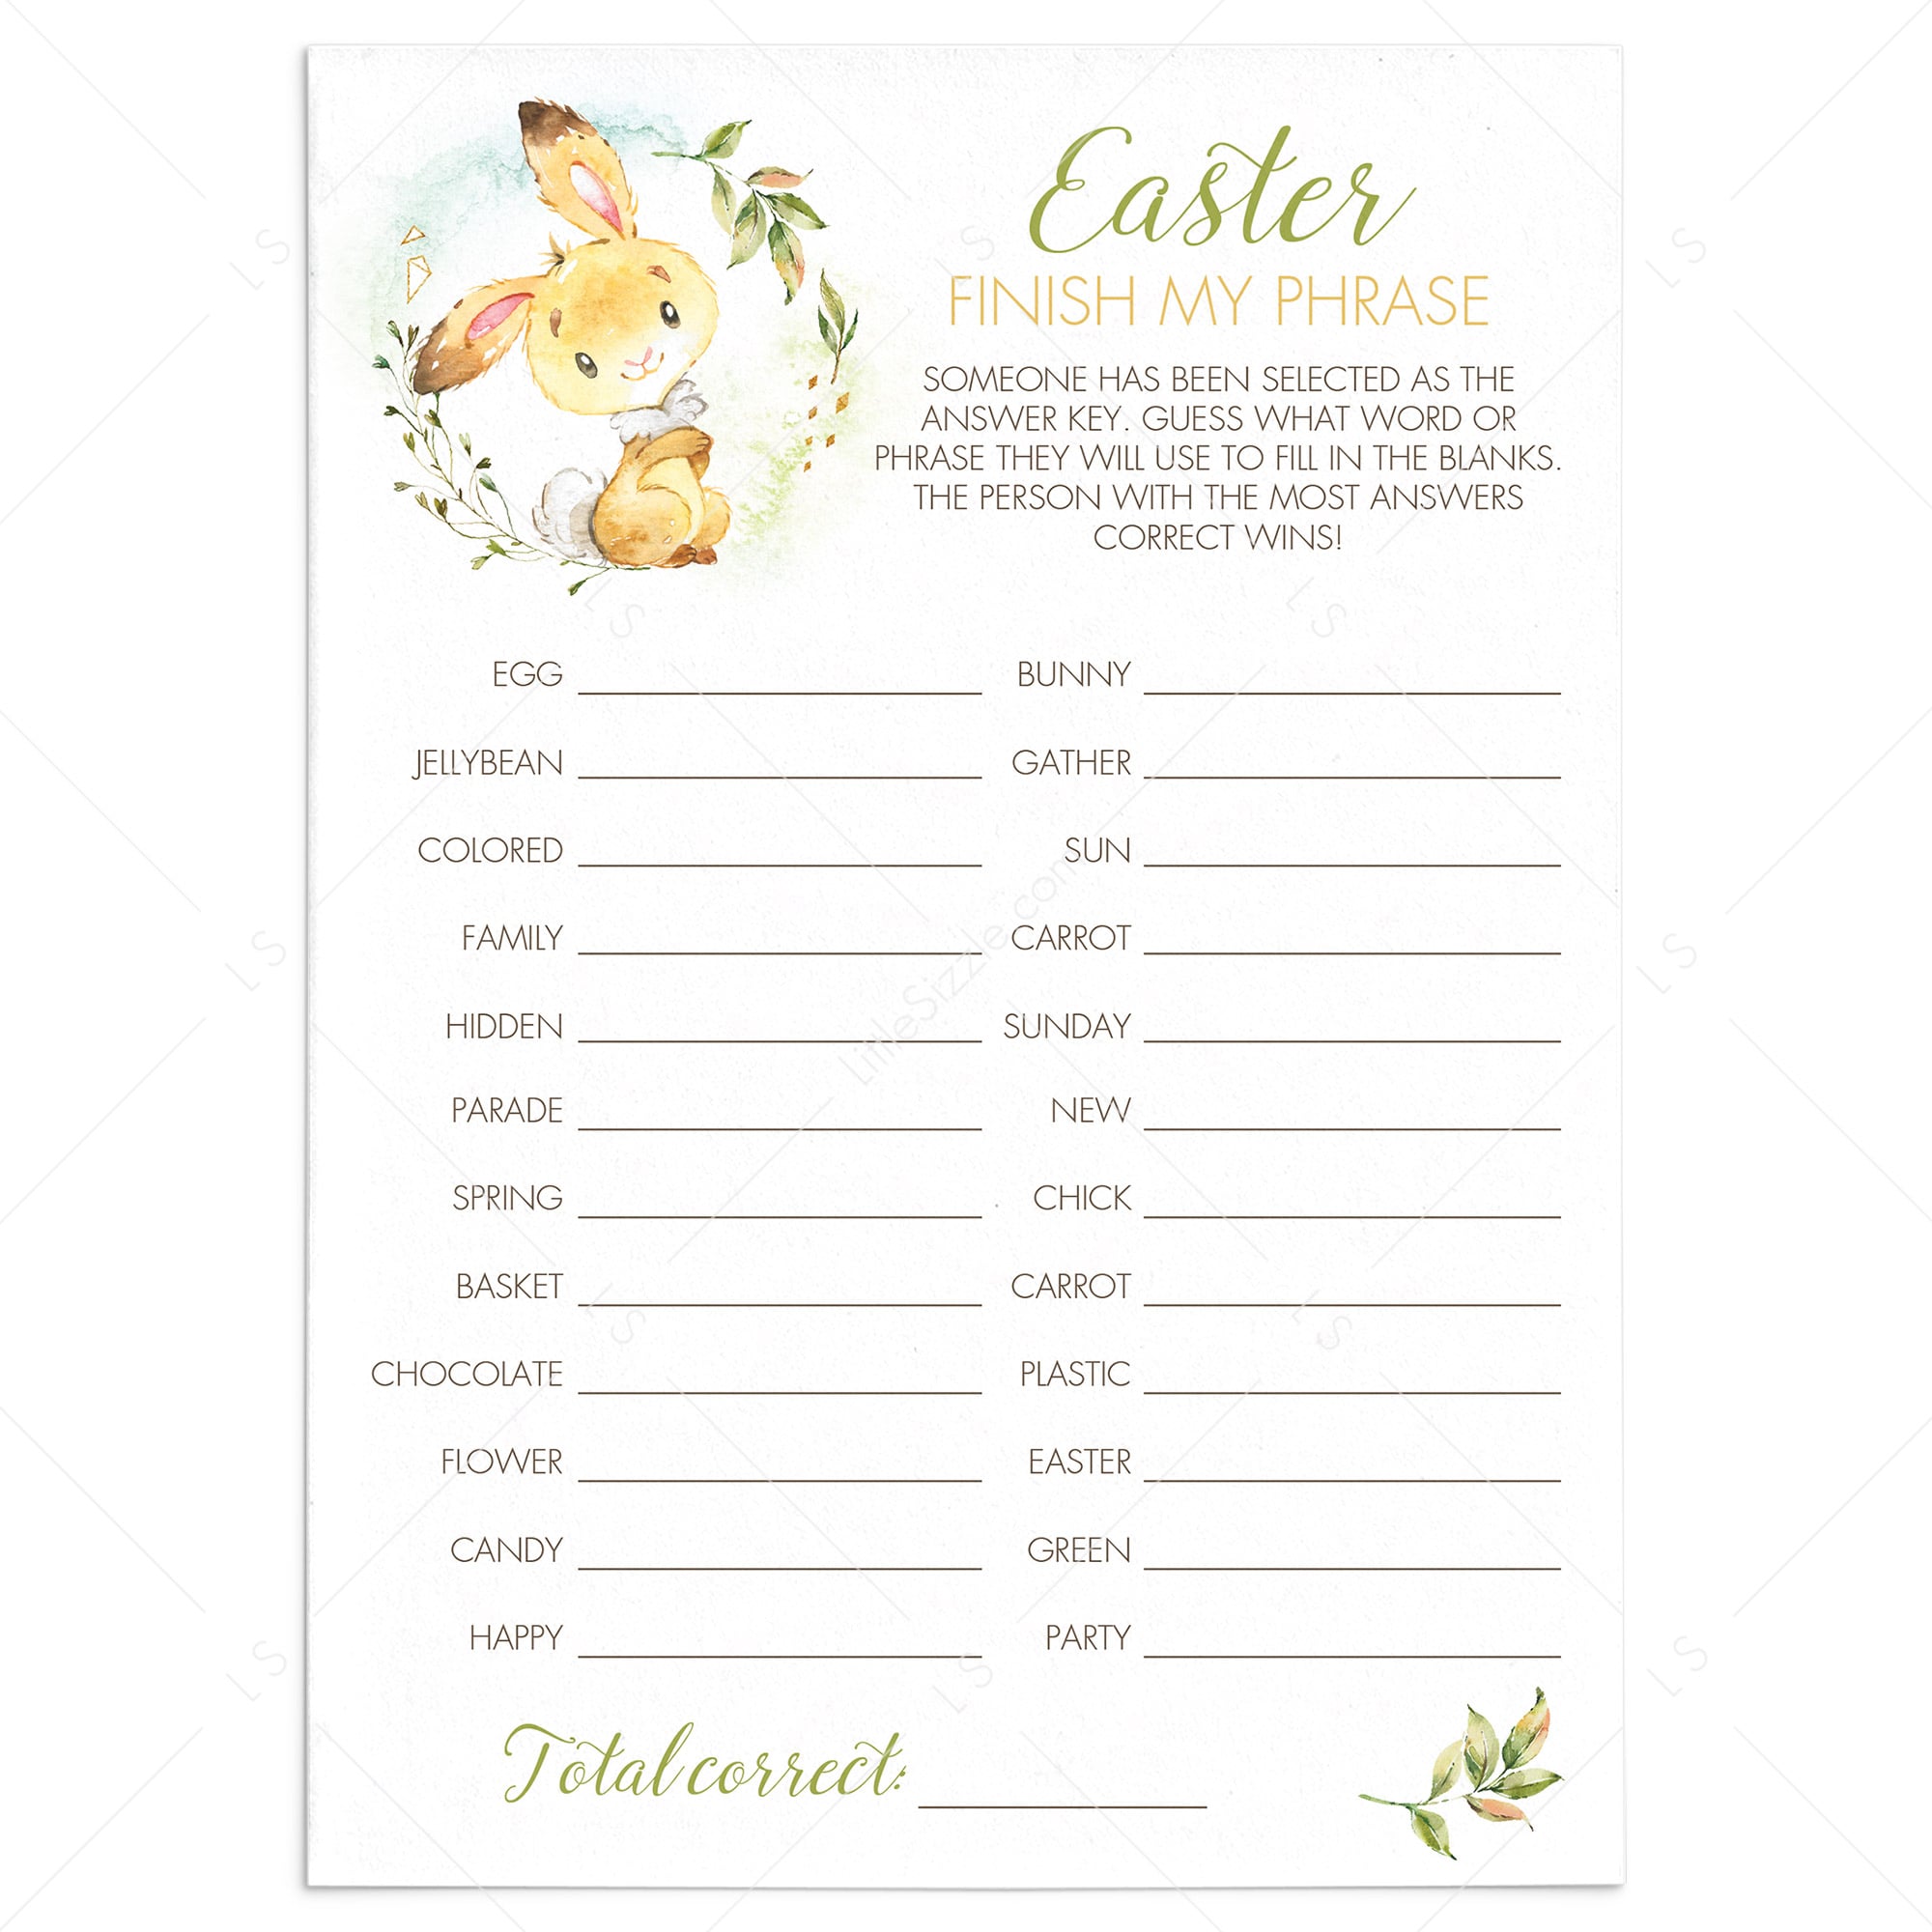 (Virtual) Easter Finish My Phrase Game Download by LittleSizzle